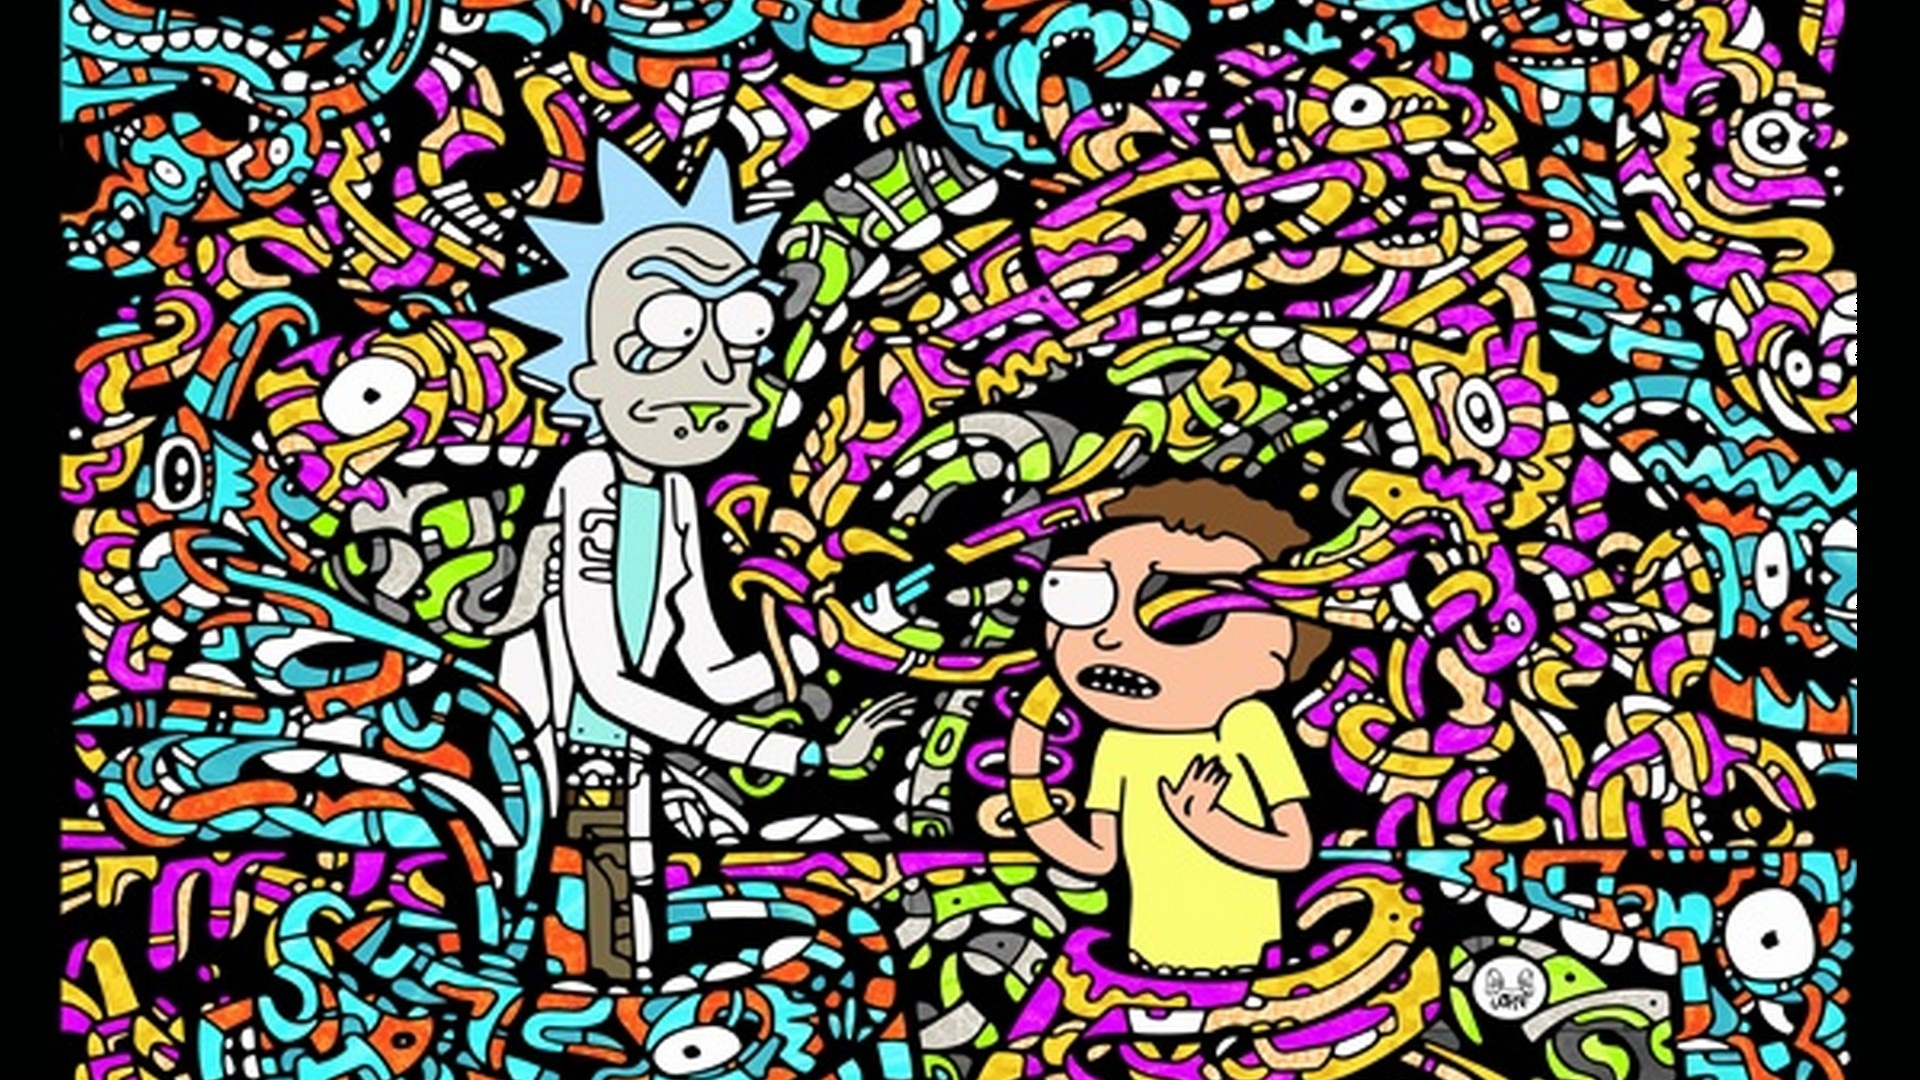 Rick and Morty Art Wallpaper with image resolution 1920x1080 pixel. You can use this wallpaper as background for your desktop Computer Screensavers, Android or iPhone smartphones